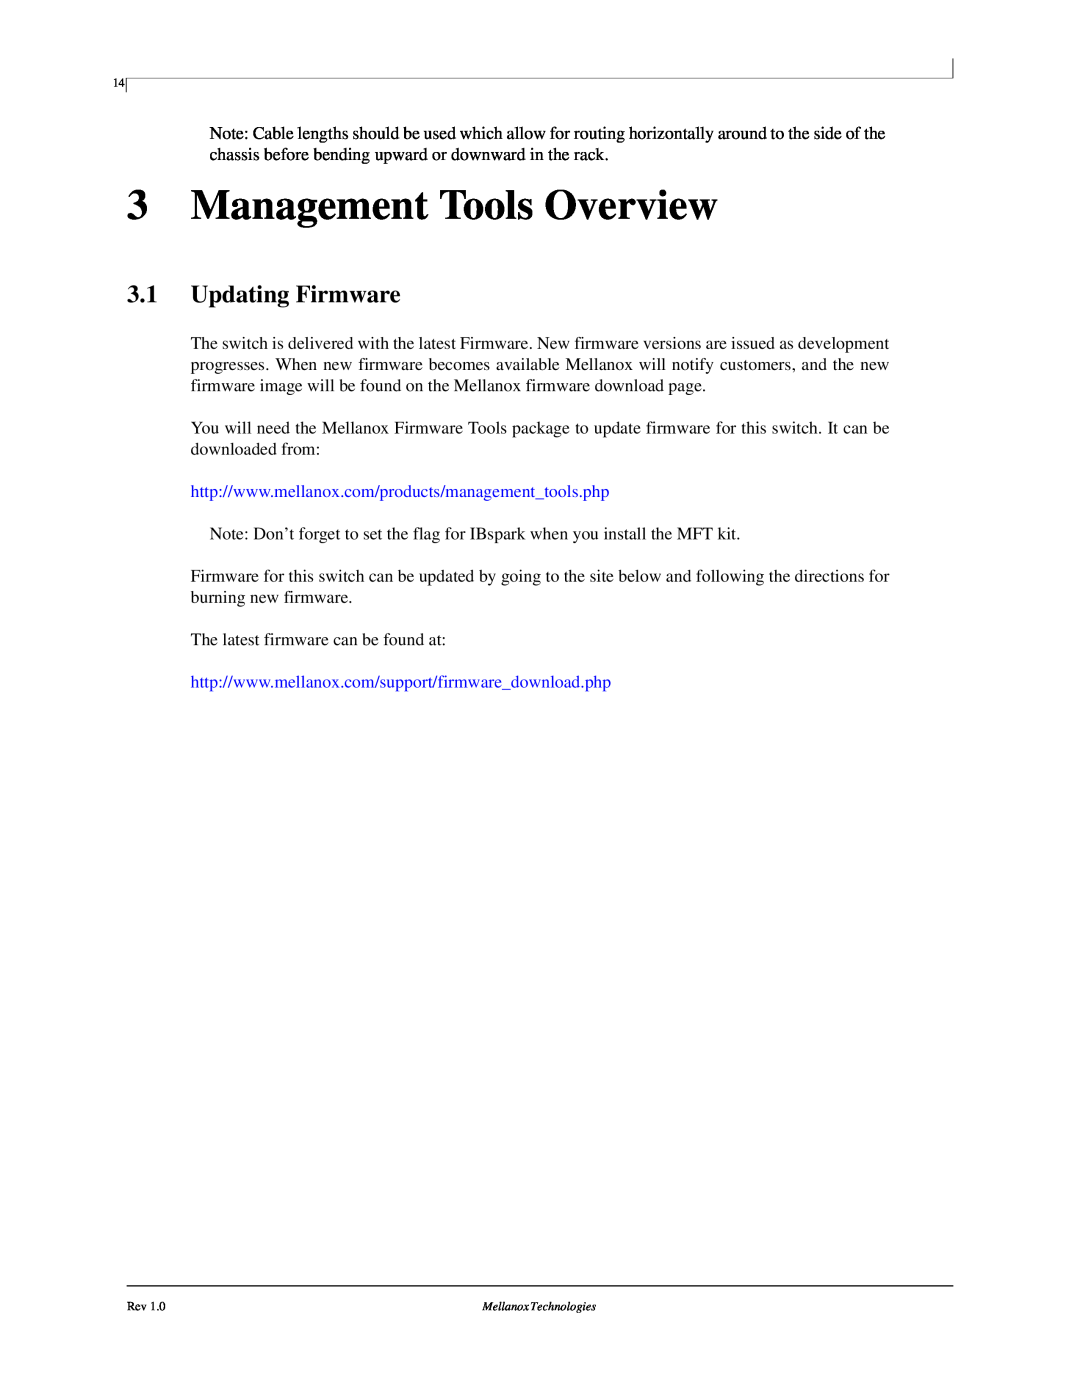 Dell M2401G user manual Management Tools Overview, Updating Firmware 